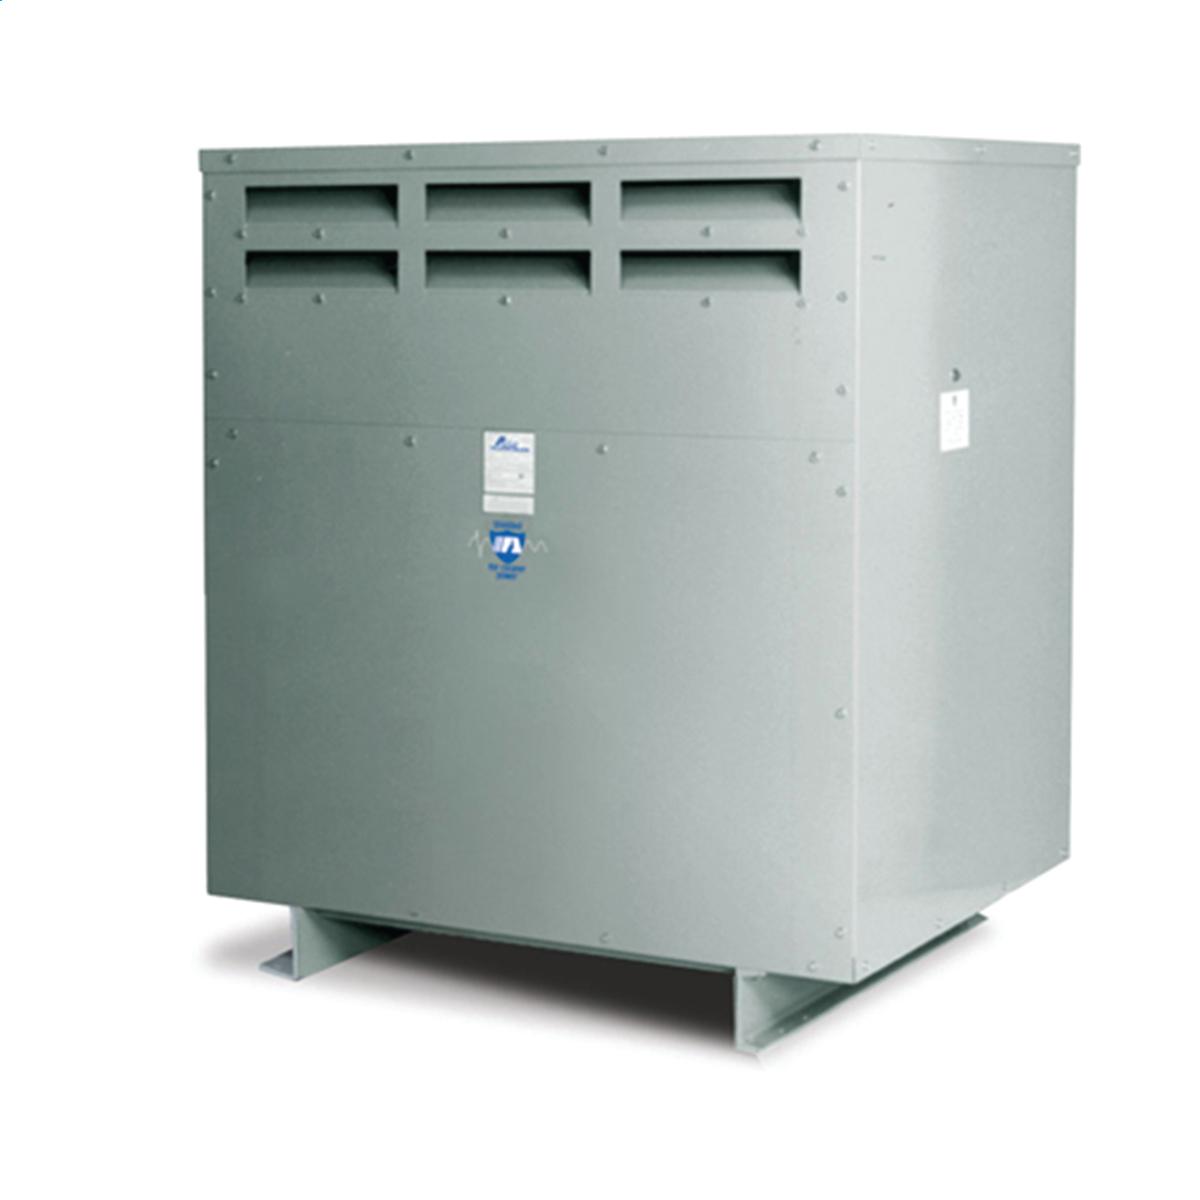 Hubbell WI015M12 Medium Voltage Transformer - Three Phase, 2400Δ - 480ΔV, 1500kVA  ; Lower operating cost over Liquid-filled ; No additional fireproofing or venting ; Long life expectancy ; Smaller, lighter easy to maintain